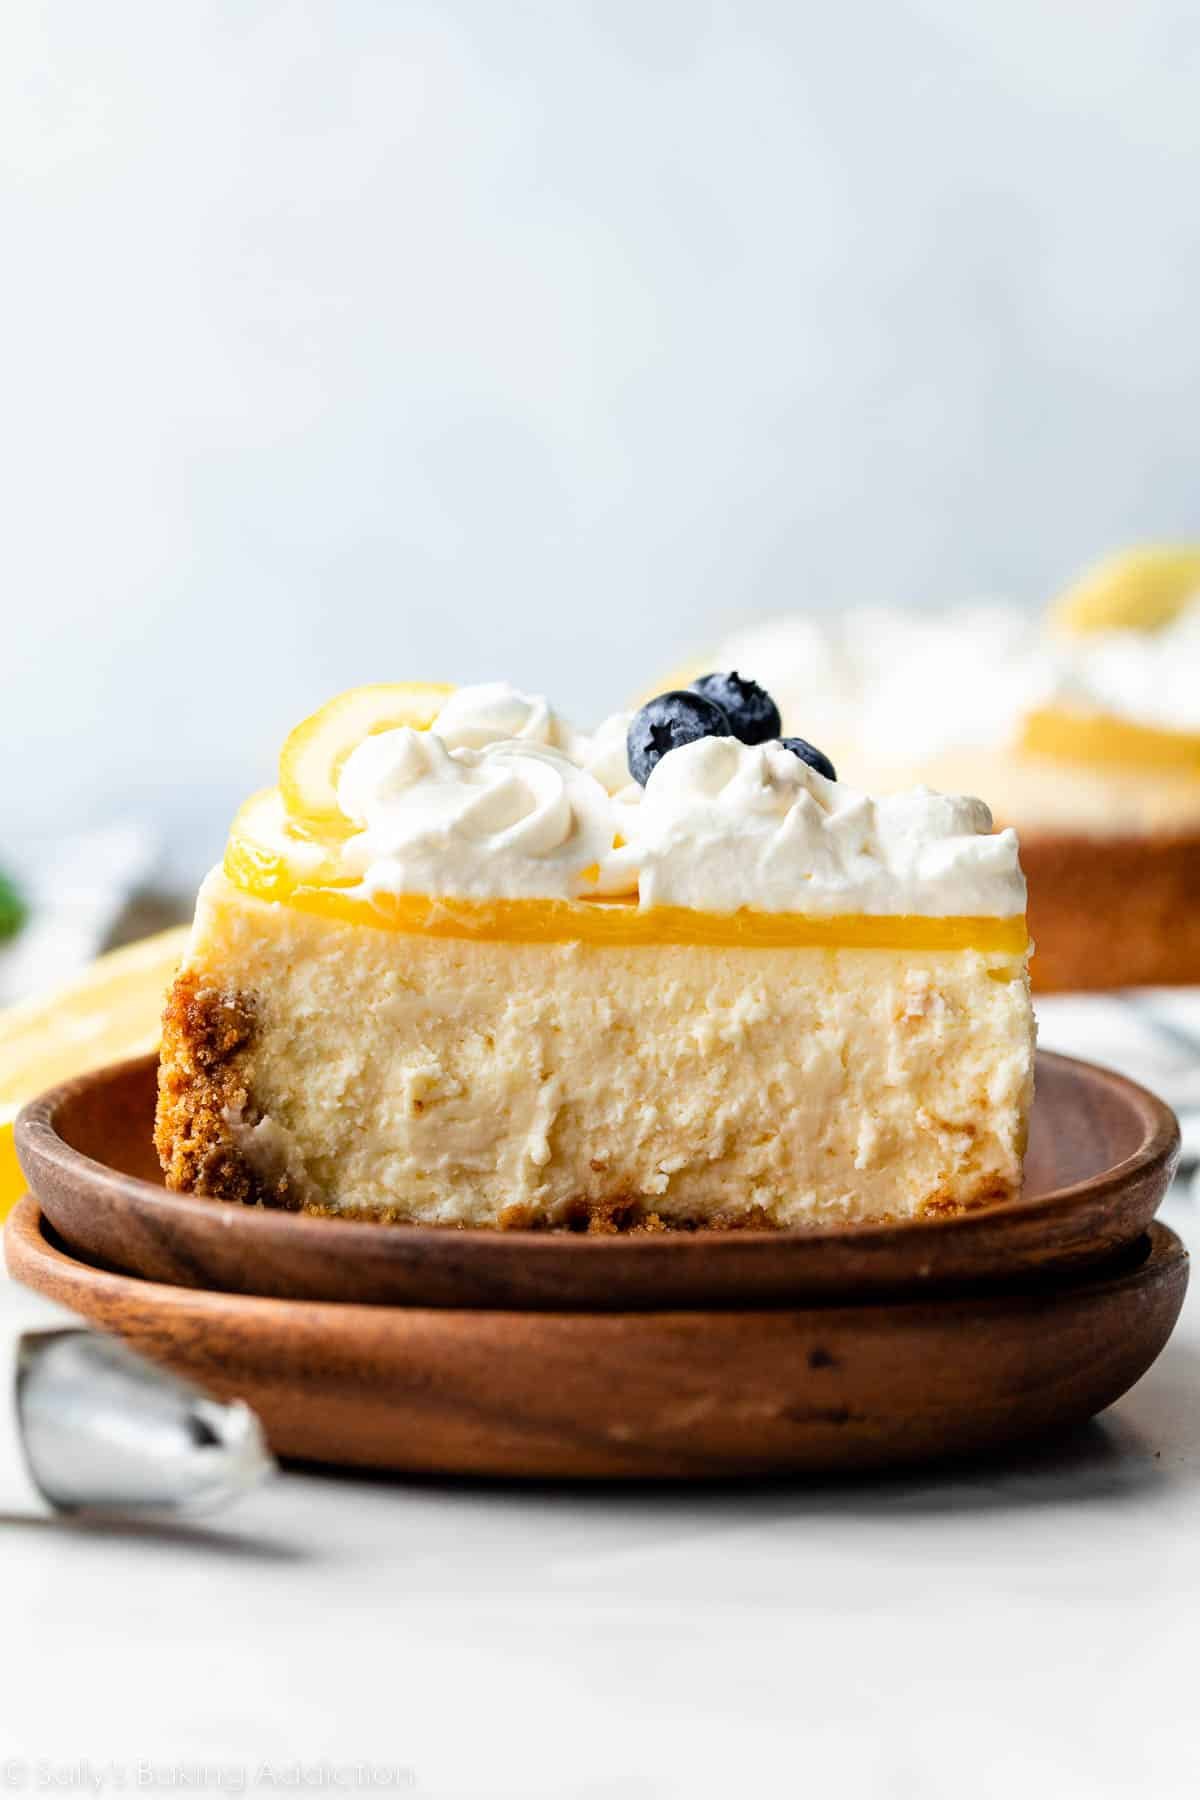 slice of lemon cheesecake with lemon curd and whipped cream on brown wooden plate.